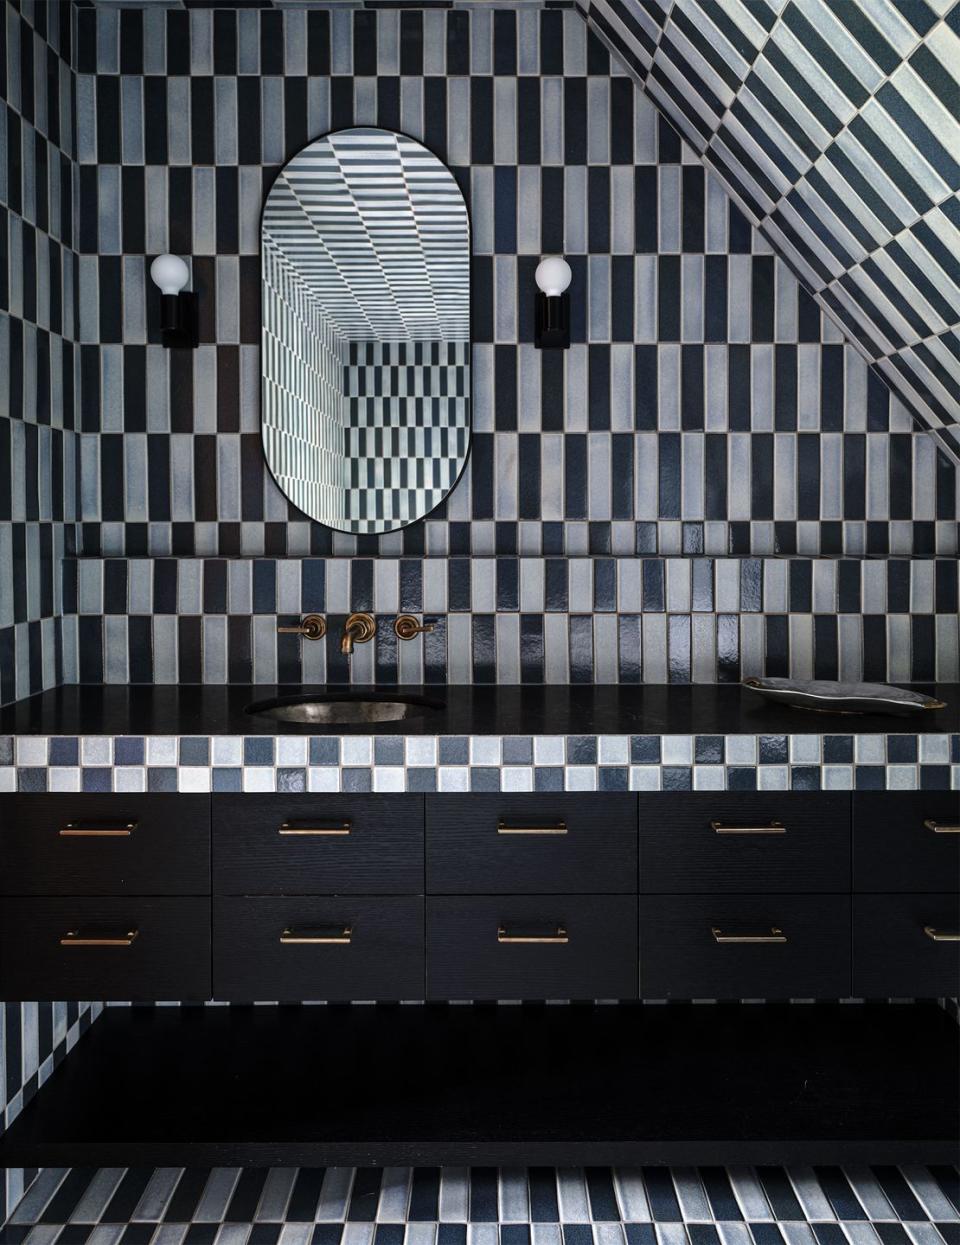 black and white rectangular tiles cover bathroom walls, floor, counter with sink and drawers, long oval mirror, two small globe sconces flank the mirror